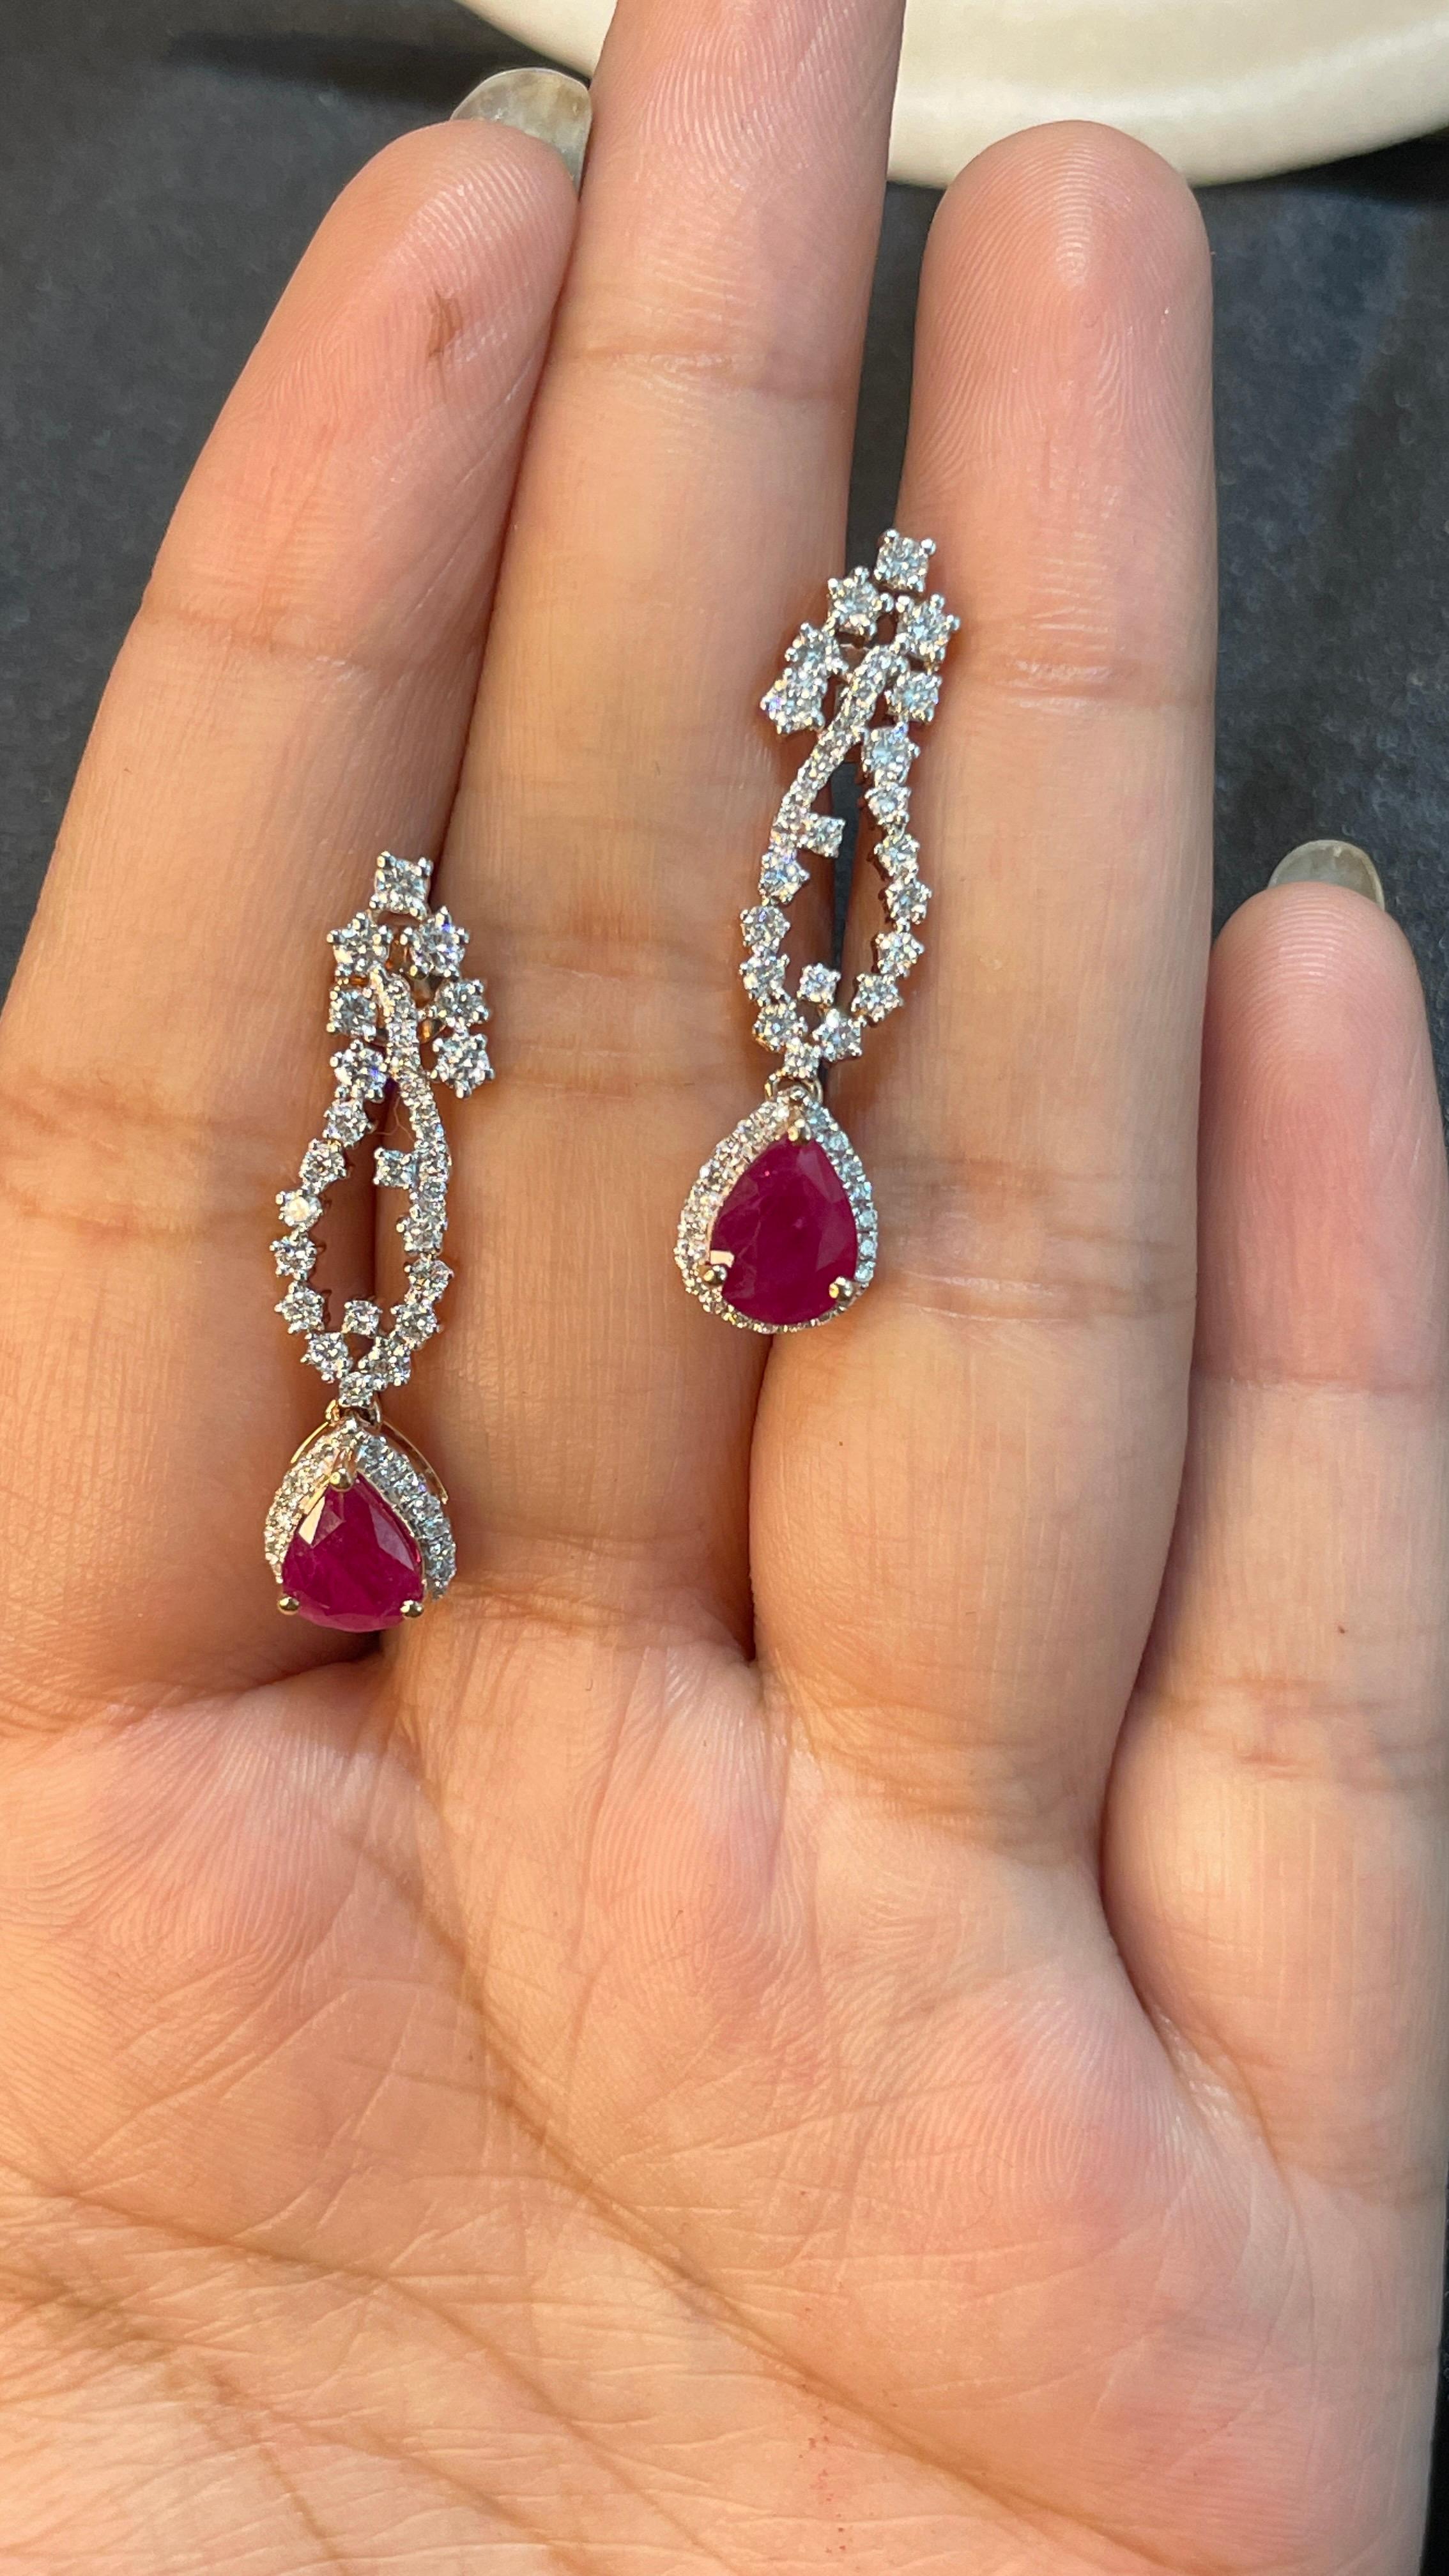 Ruby Dangle earrings to make a statement with your look. These earrings create a sparkling, luxurious look featuring pear cut gemstone.
If you love to gravitate towards unique styles, this piece of jewelry is perfect for you.

PRODUCT DETAILS :-

>